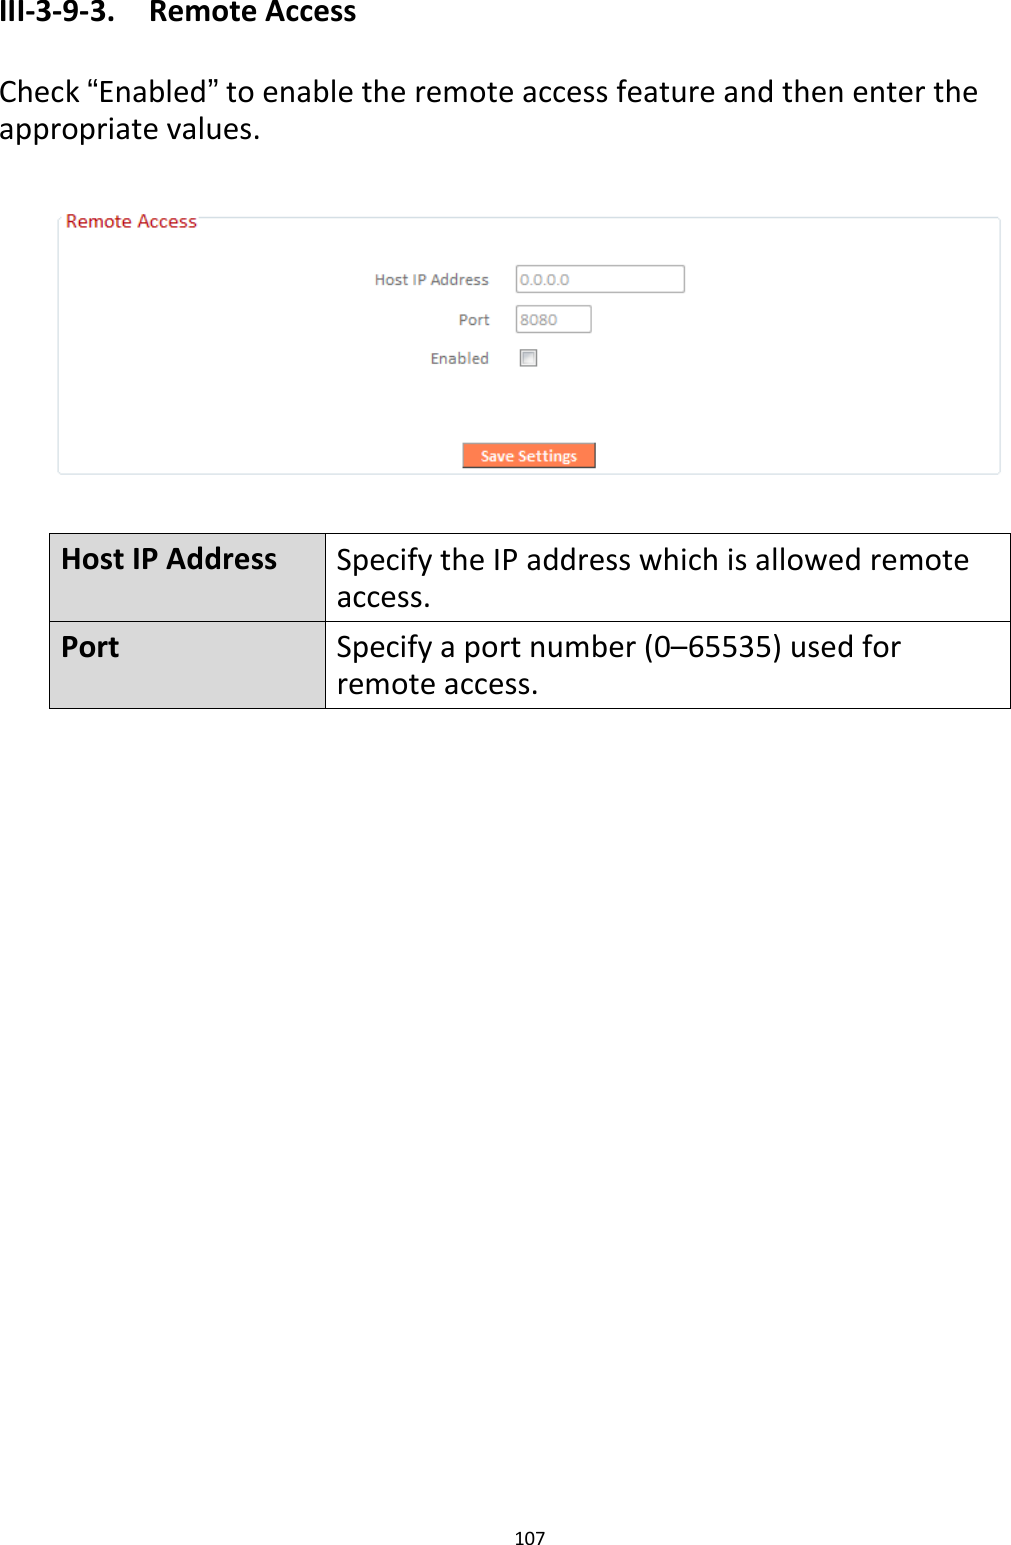 107  III-3-9-3.  Remote Access  Check “Enabled” to enable the remote access feature and then enter the appropriate values.    Host IP Address Specify the IP address which is allowed remote access. Port Specify a port number (0–65535) used for remote access.  